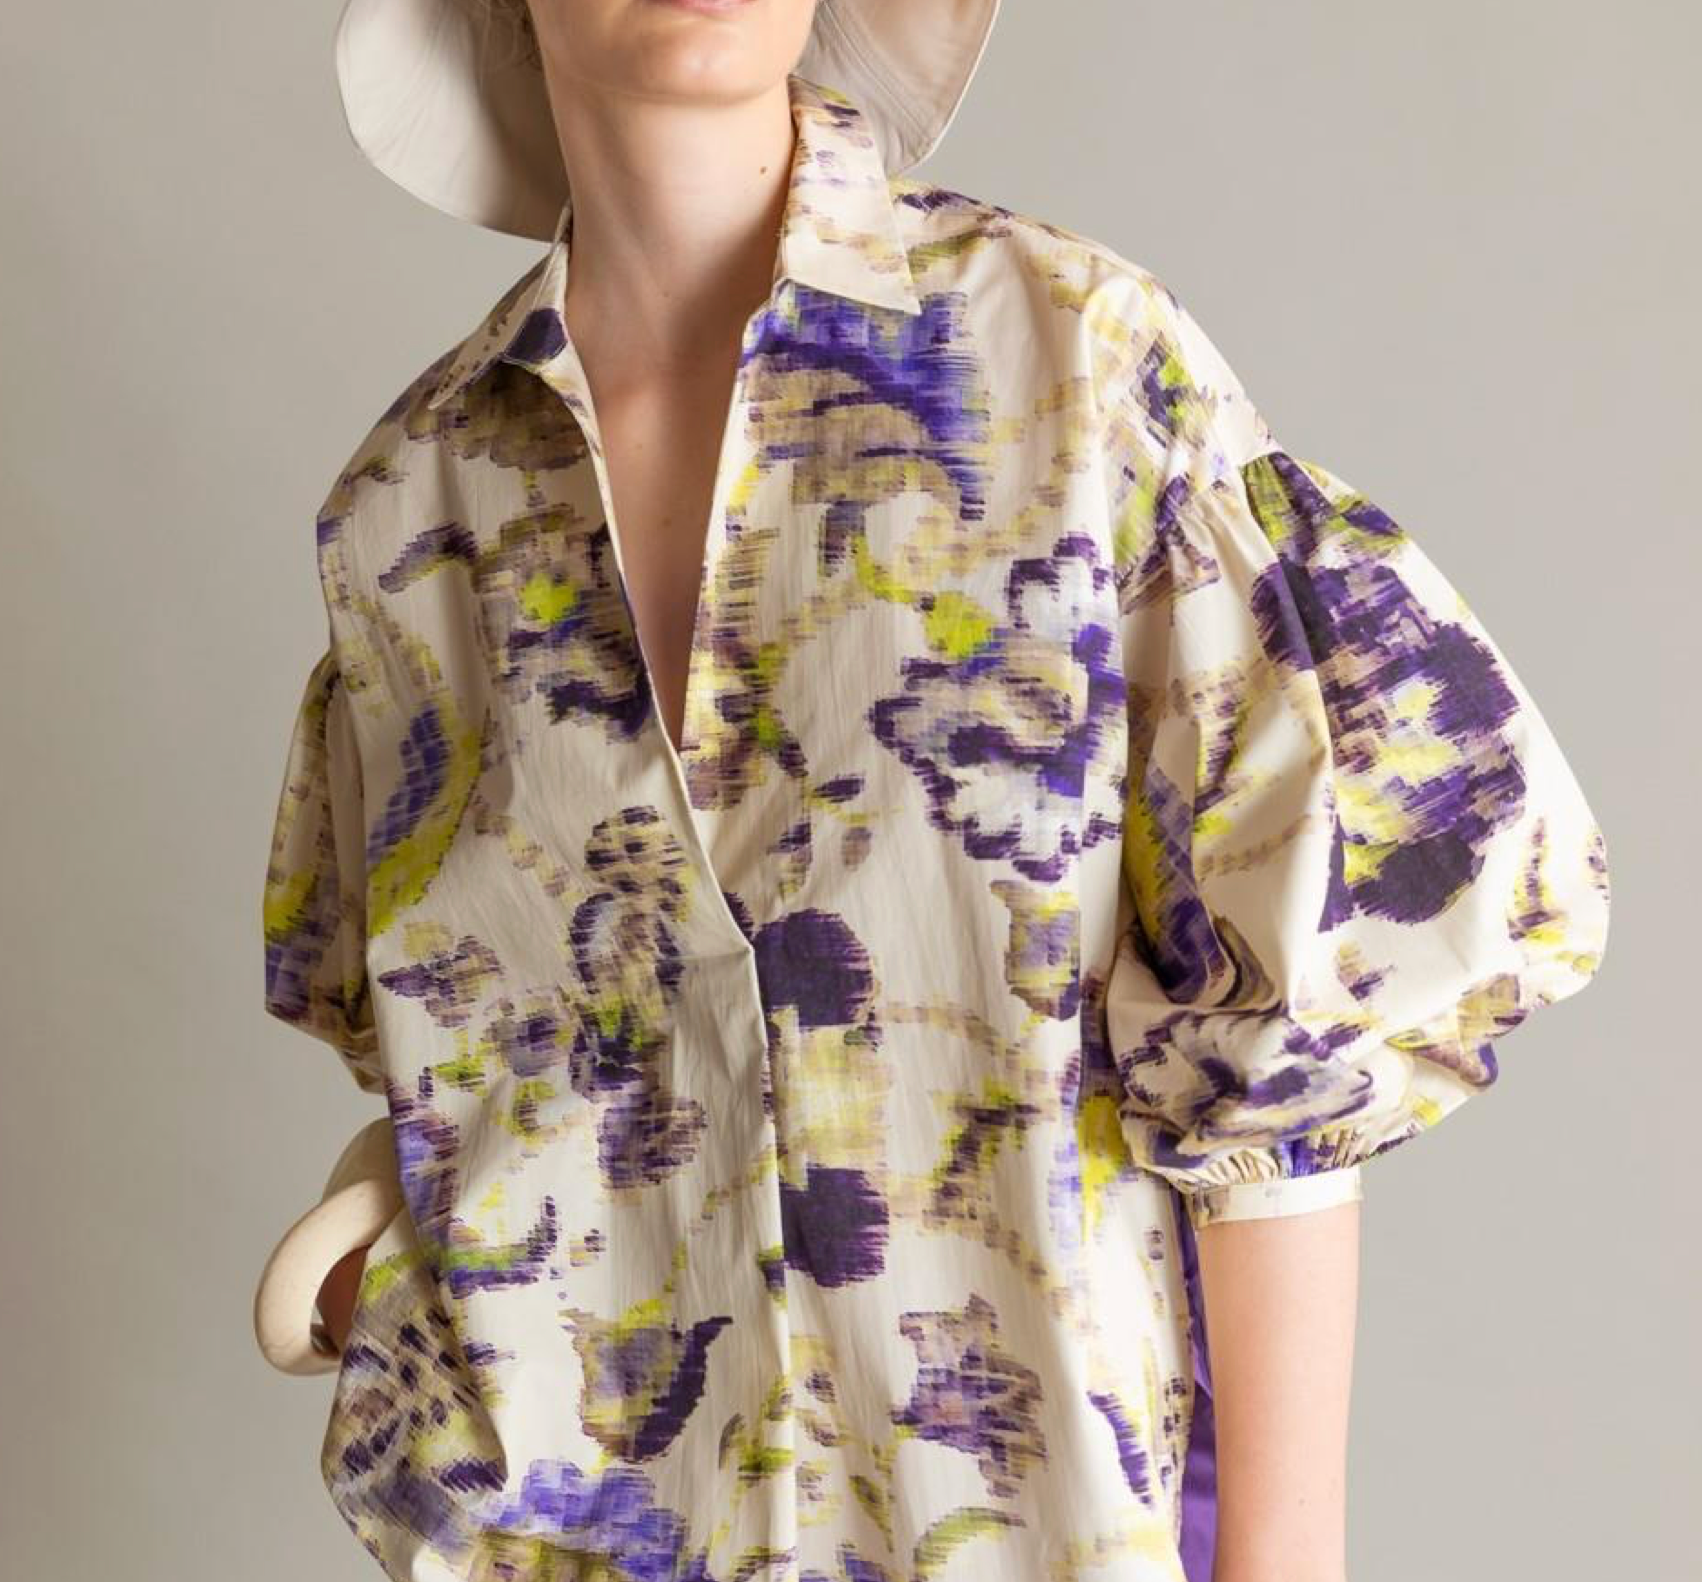 Discover the perfect blend of comfort and style with our 'Psophia' Poplin Floral Print Blouse. This over-sized blouse, designed in Spain, offers effortless elegance and a flattering fit. Make a statement with its bold floral print and stand out in any occasion.